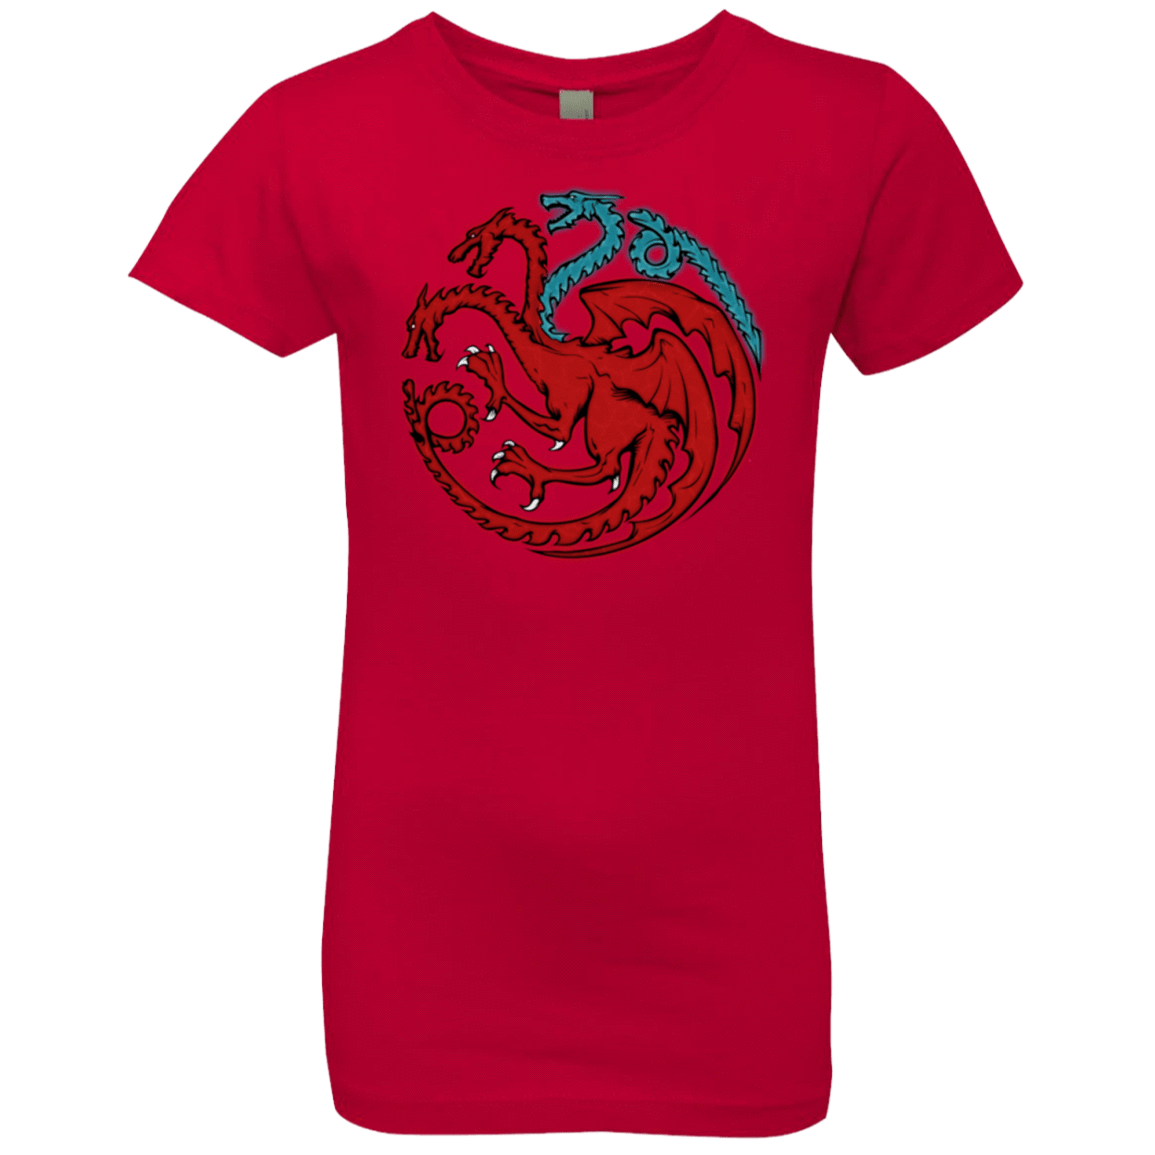 T-Shirts Red / YXS Trinity of fire and ice V2 Girls Premium T-Shirt